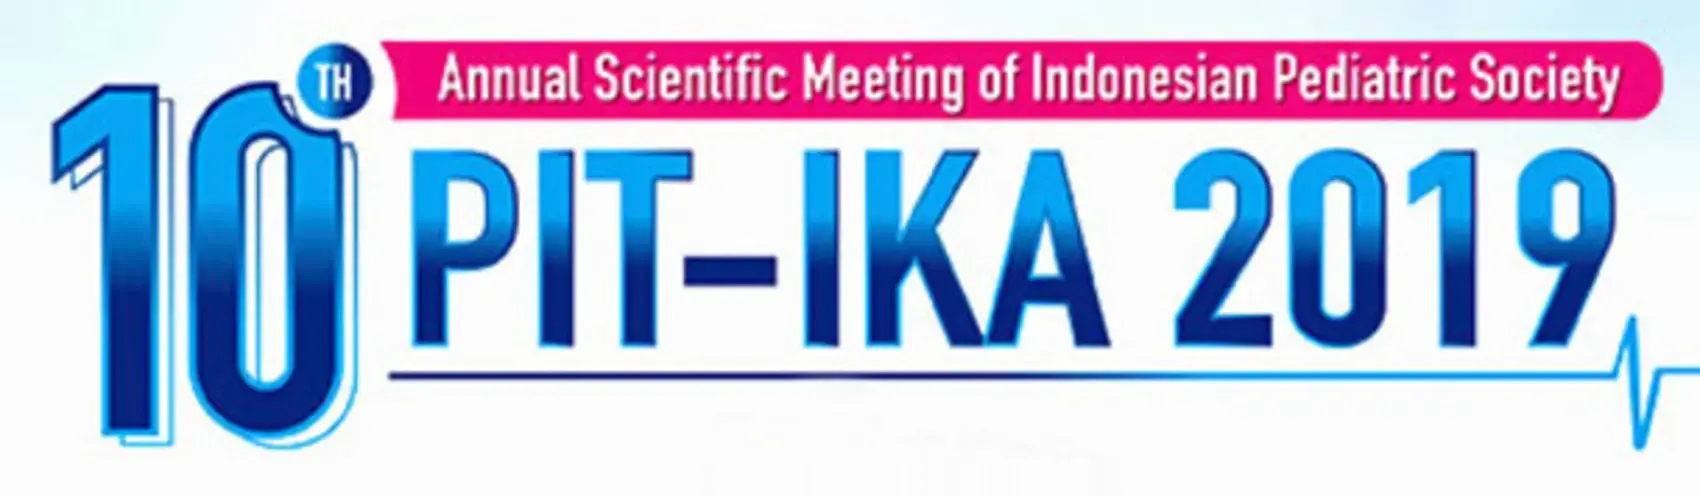 THE 10TH ANNUAL SCIENTIFIC MEETING OF INDONESIAN PEDIATRIC SOCIETY